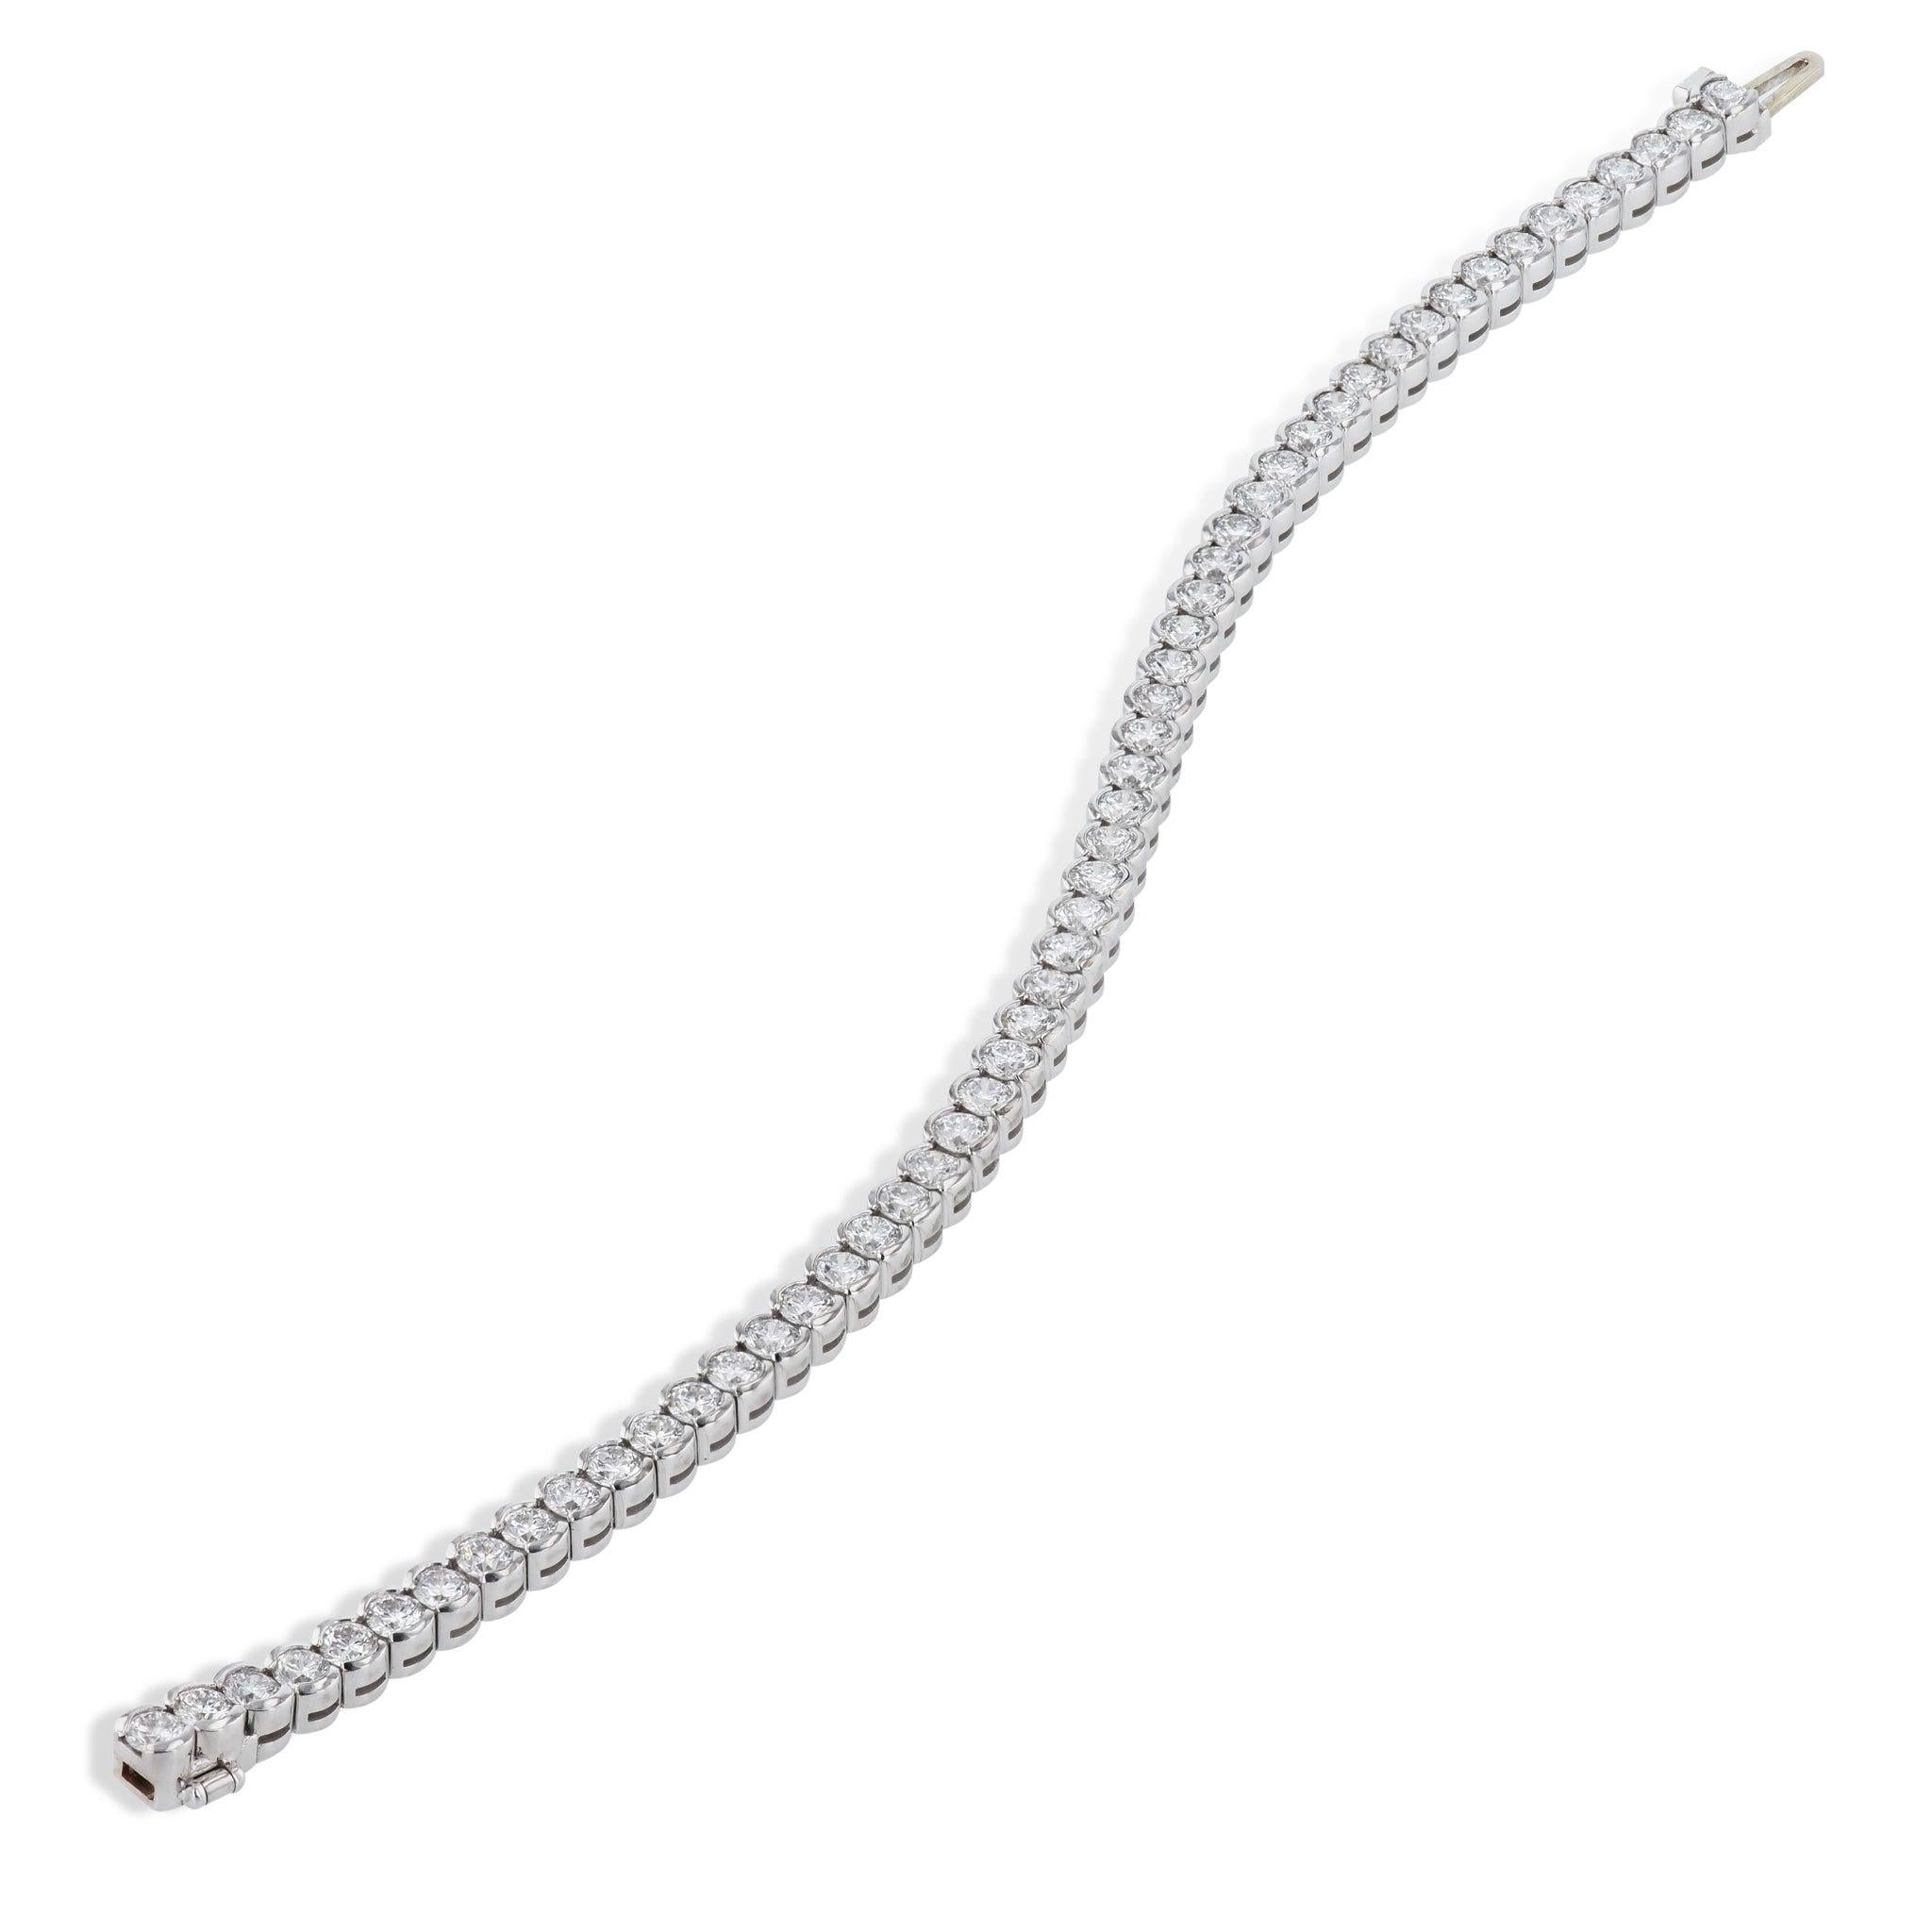 Let the sparkle of this 18kt White Gold Tennis Bracelet shine with its 54 dazzling diamonds - exquisitely semi-bezel set. Hand-crafted with absolute care by H&H Jewels, it's an utterly mesmerizing accessory worthy of the grandest